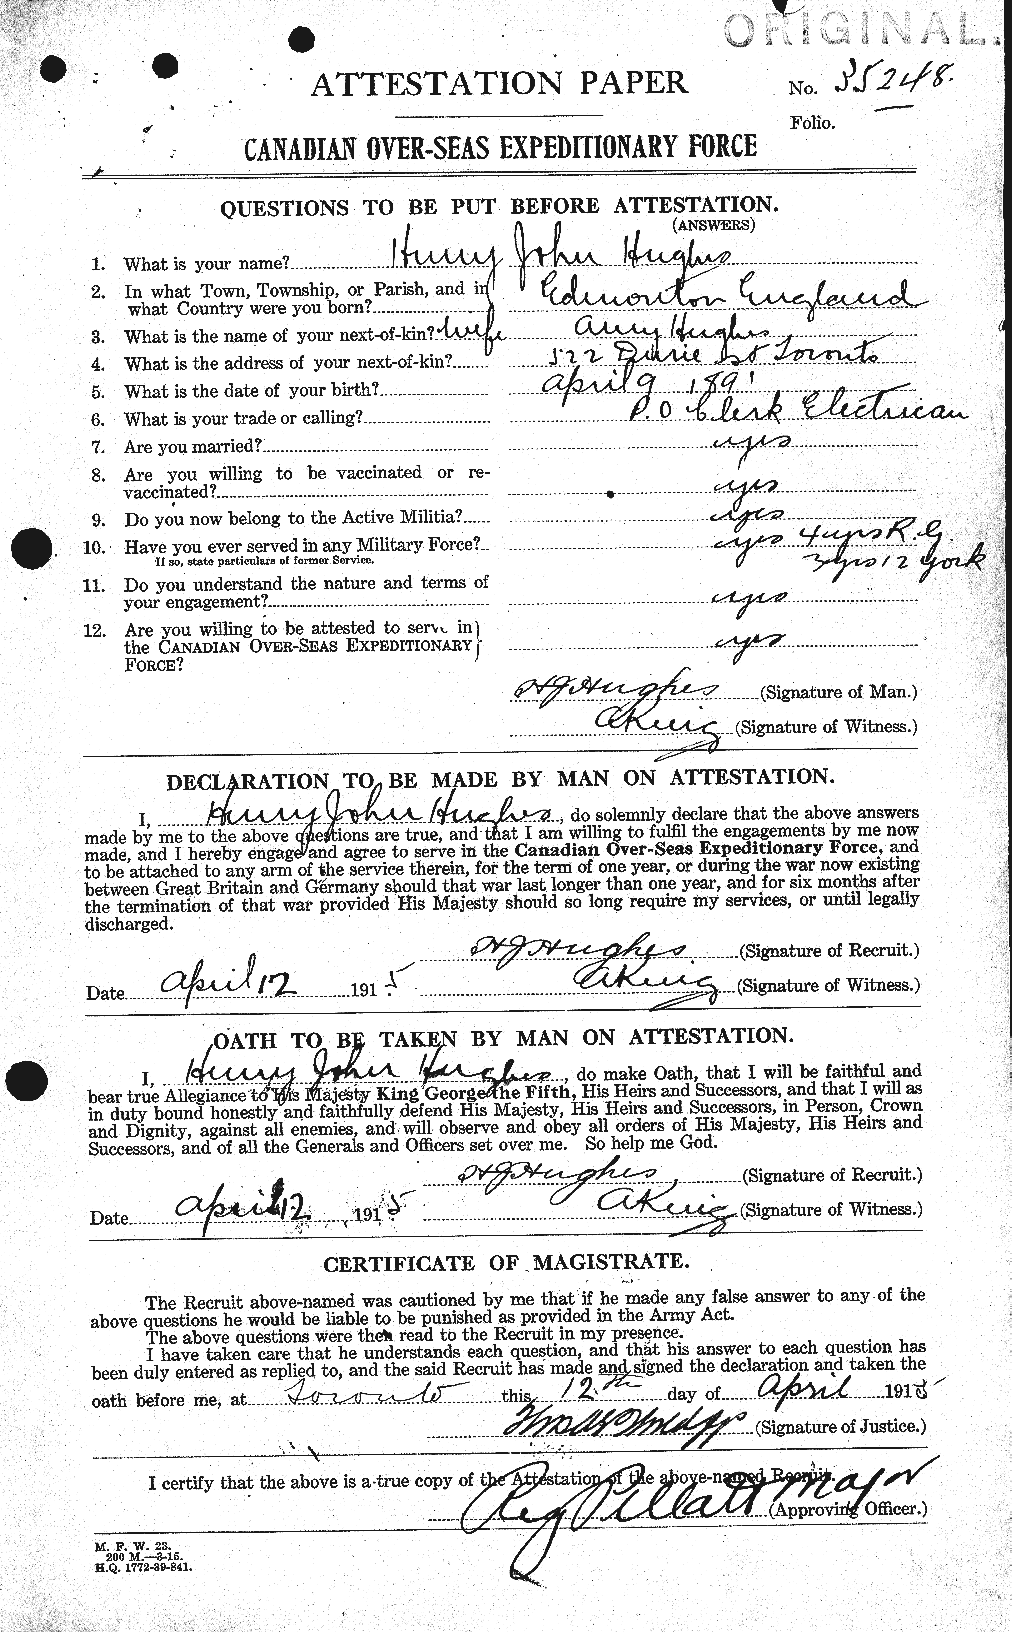 Personnel Records of the First World War - CEF 403888a